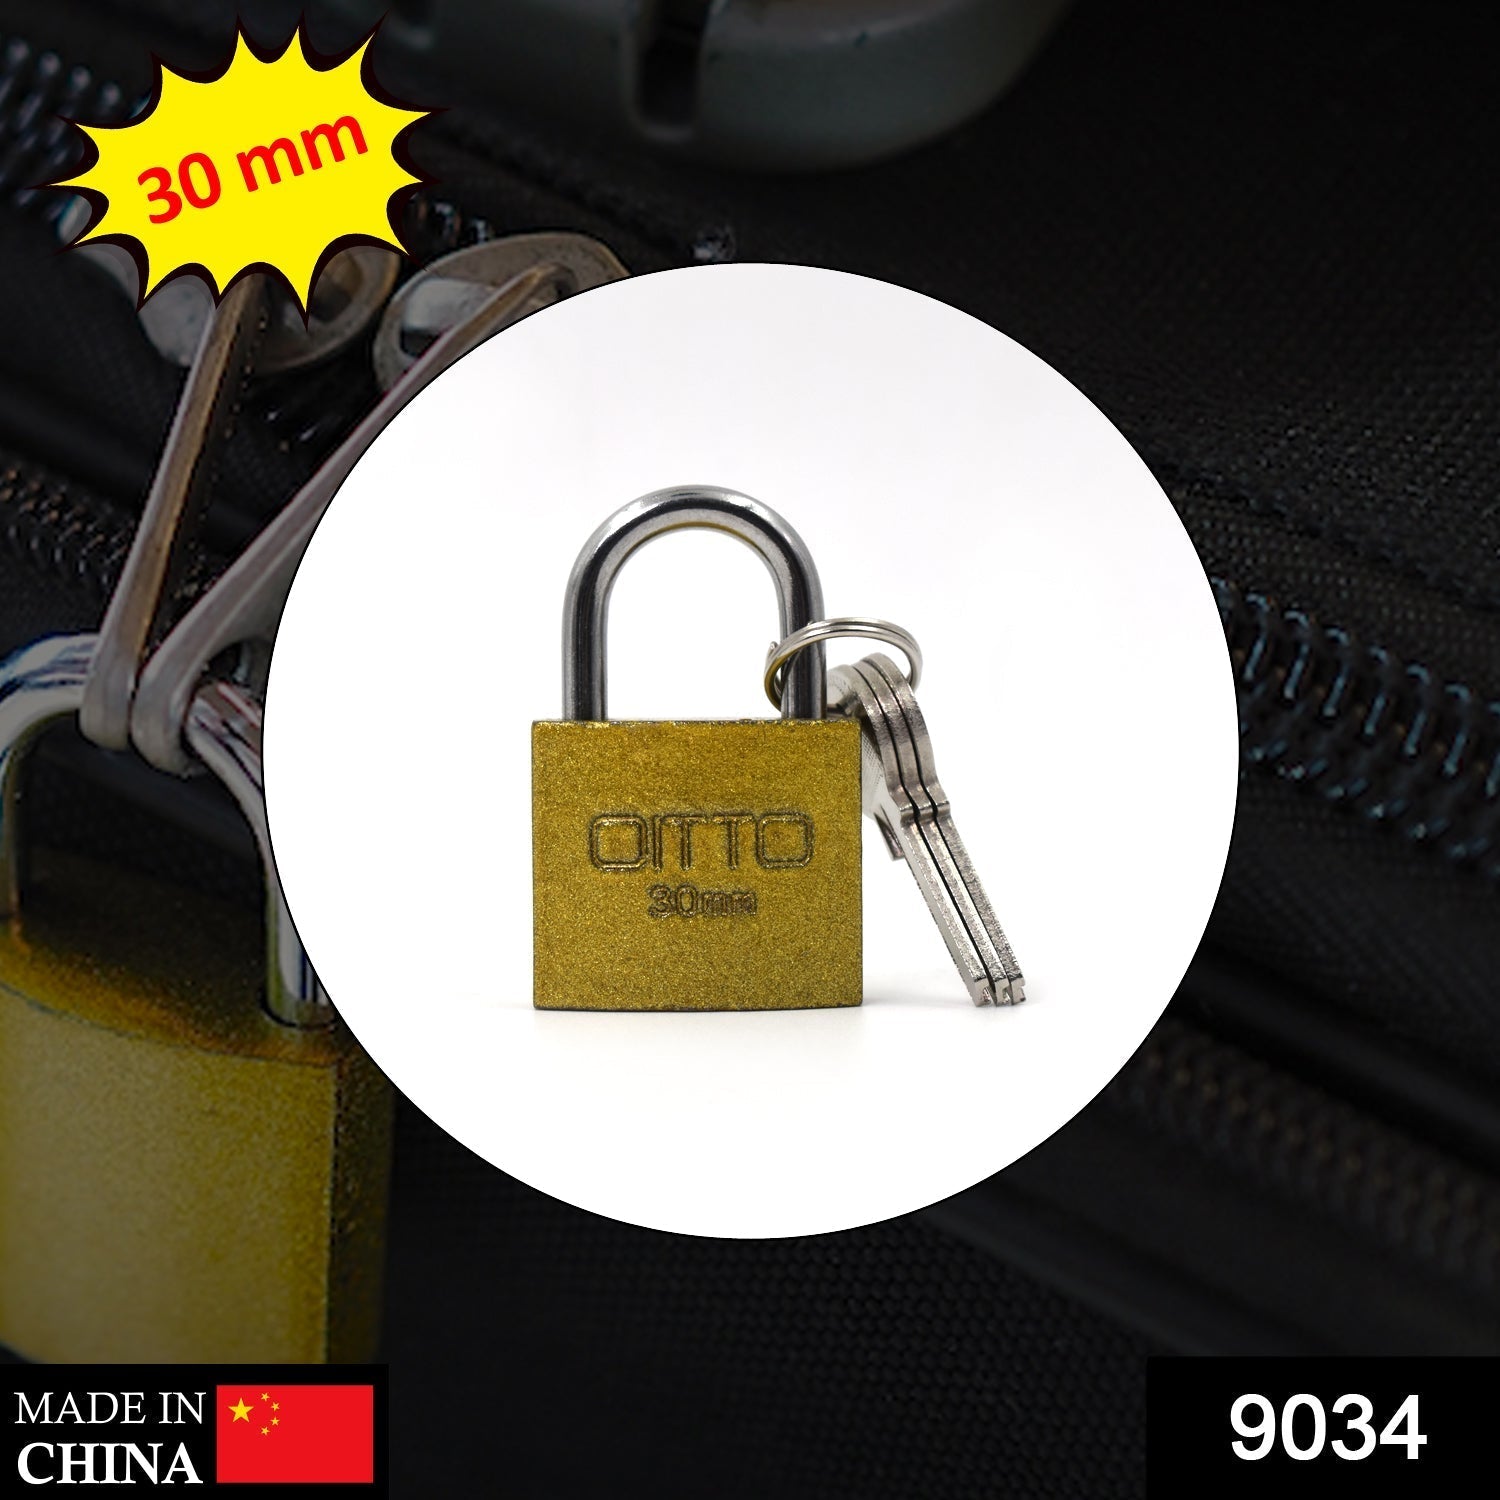 9034 30 Mm Lock N Key Used For Security Purposes In Important Places.